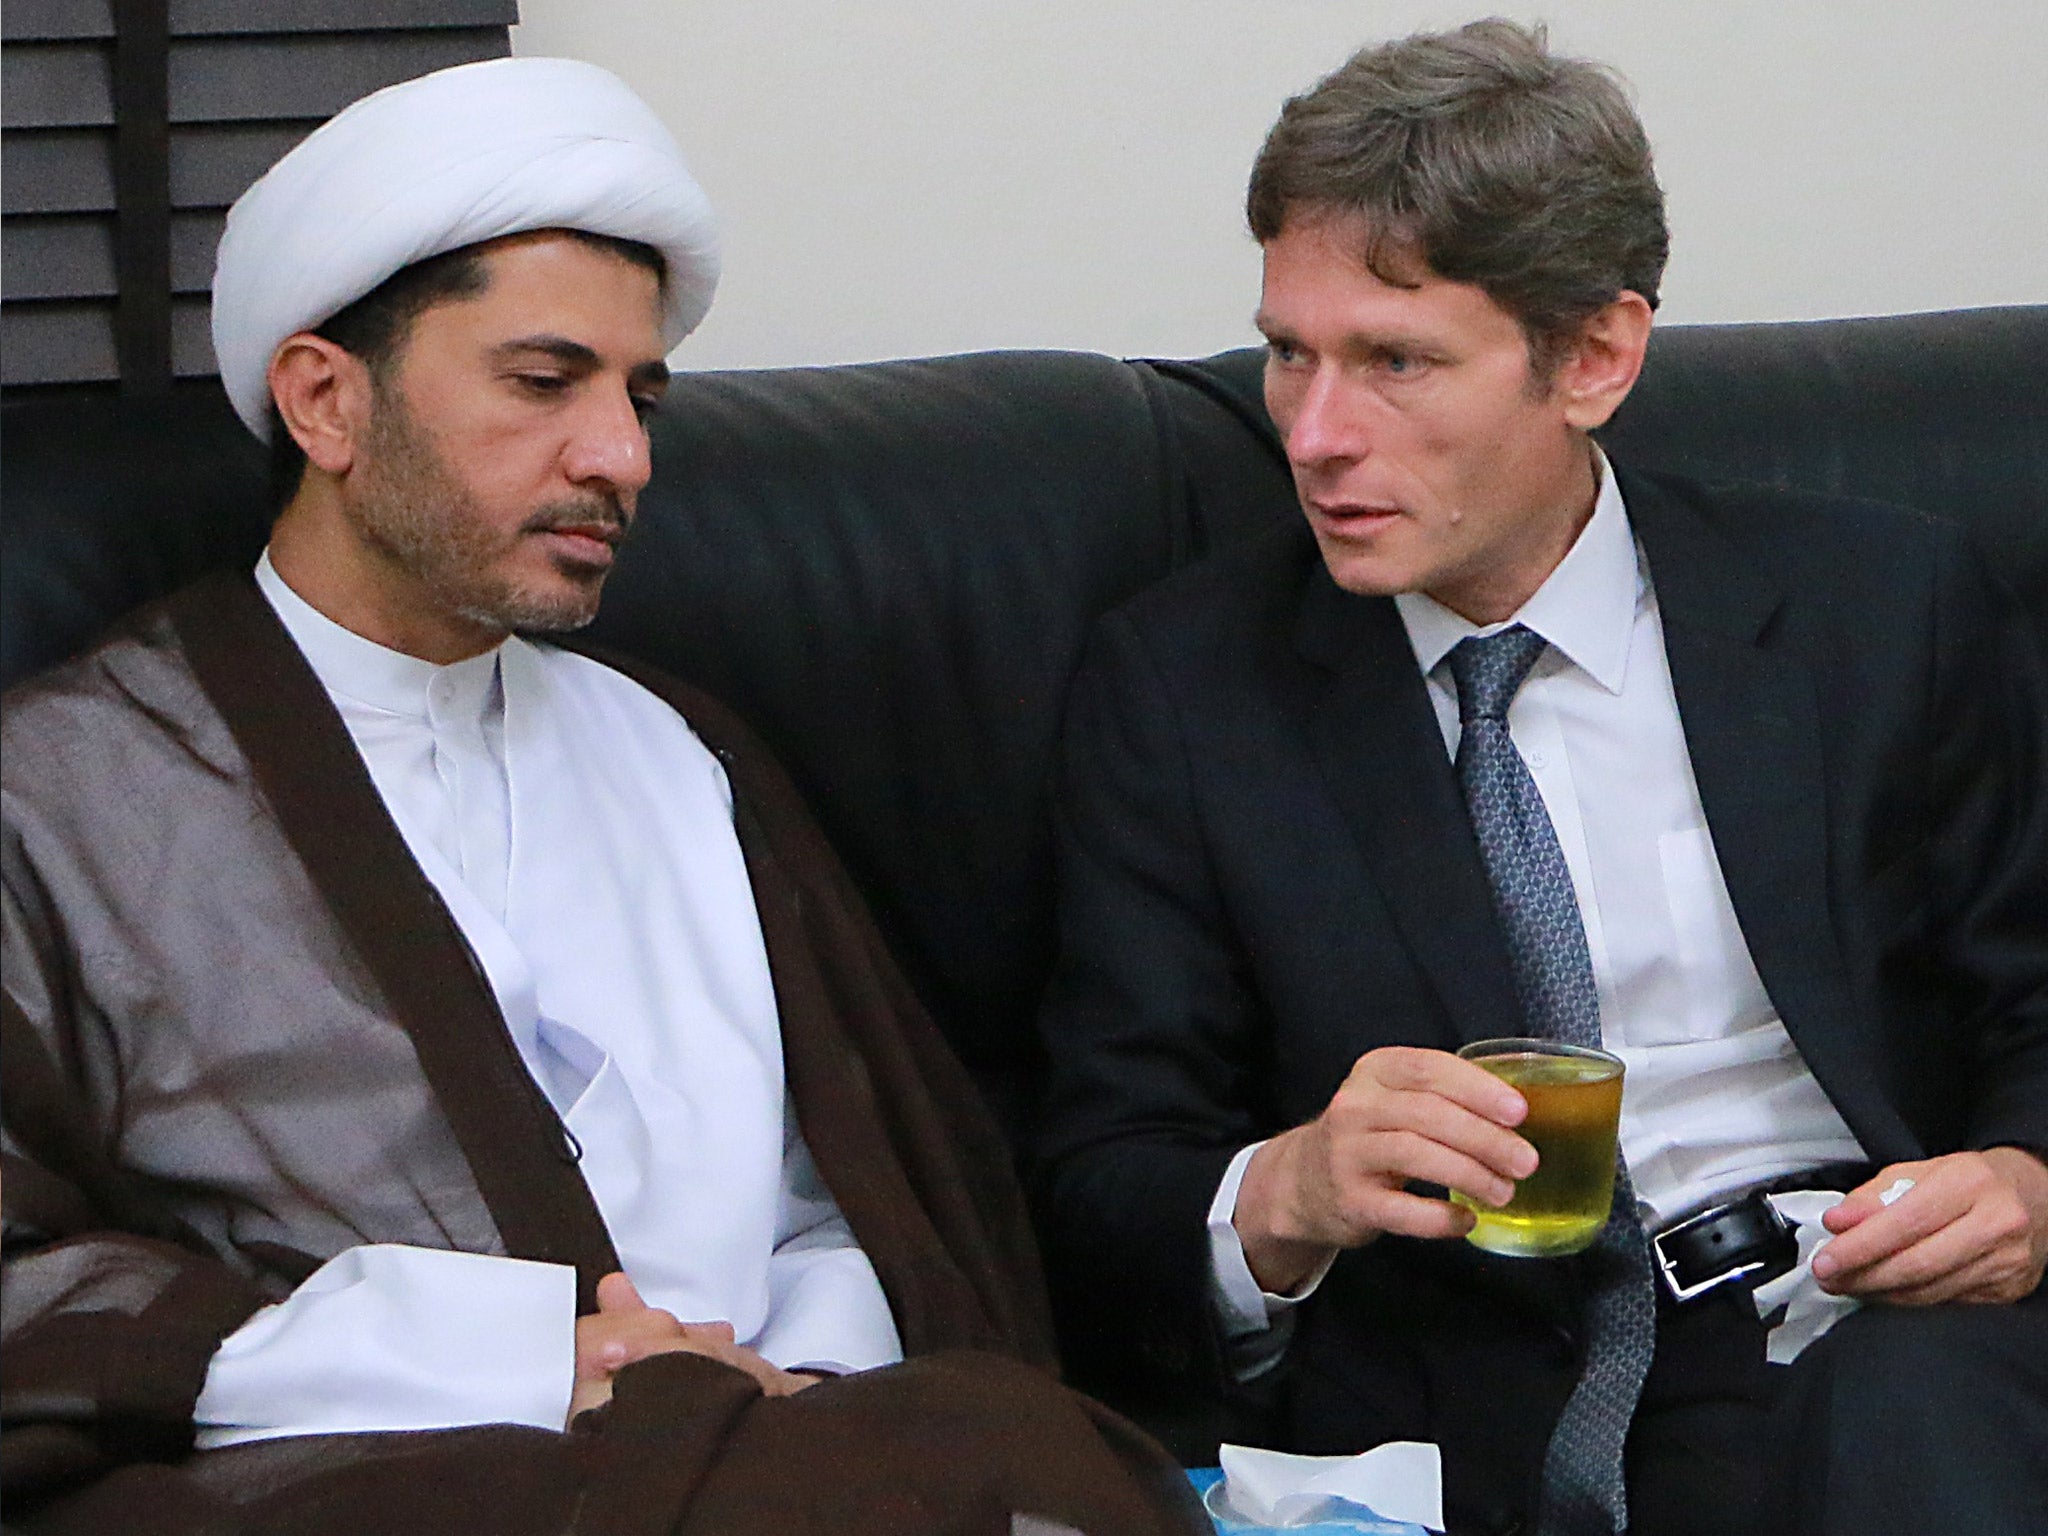 Tom Malinowski (right), the US assistant secretary for human rights, meeting with Bahrain's Al-Wefaq opposition group leader Sheikh Ali Salman, on Sunday